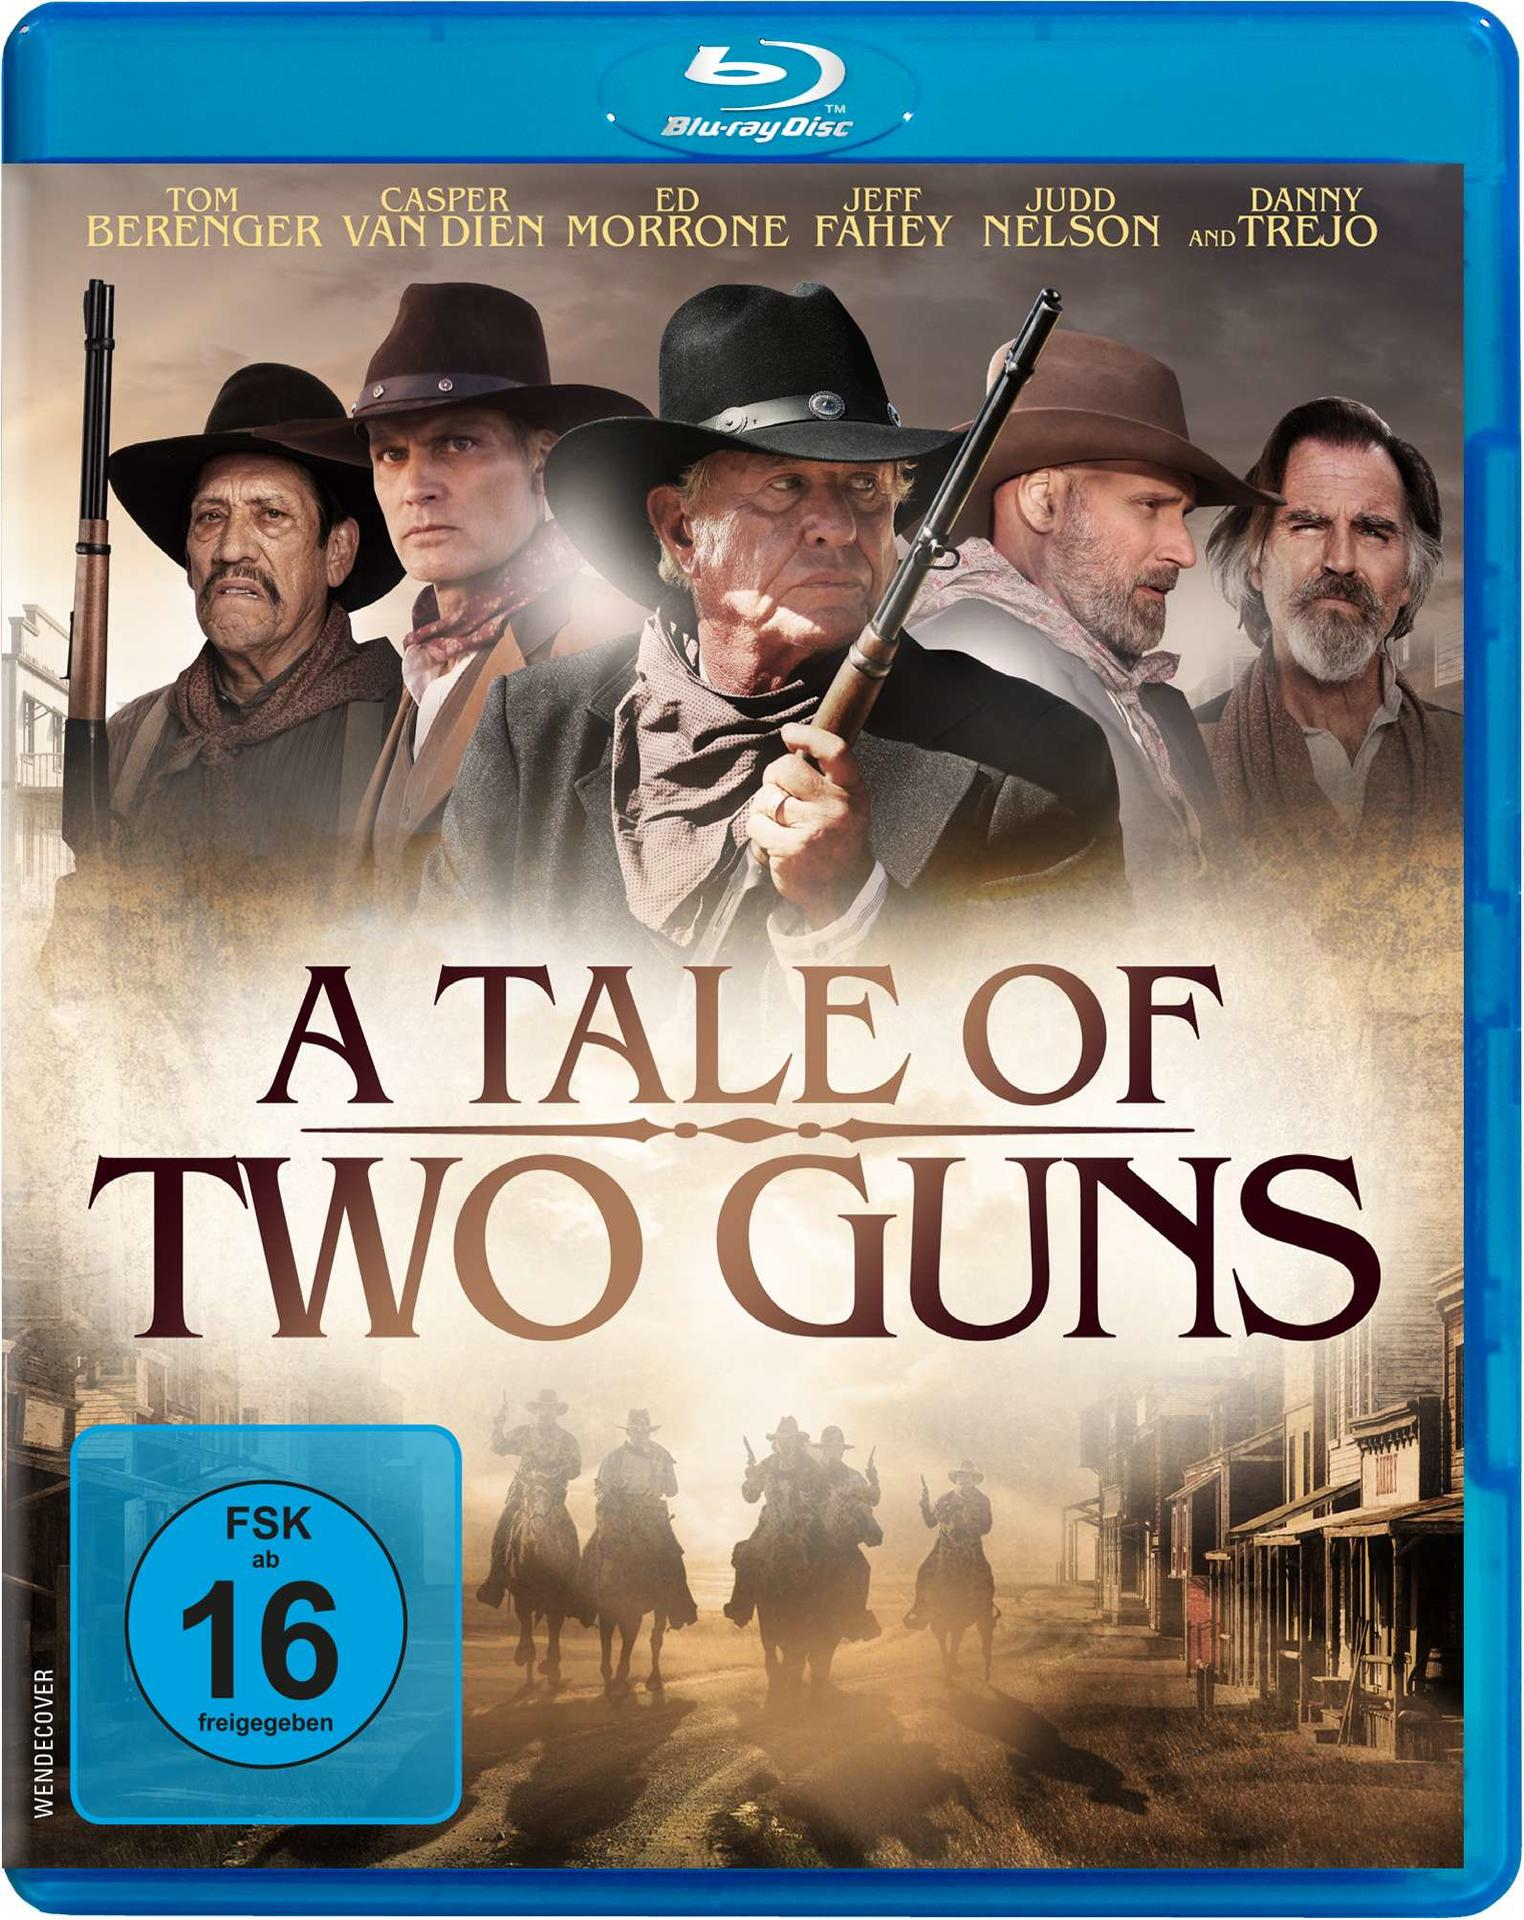 Two Tale Blu-ray Guns of A